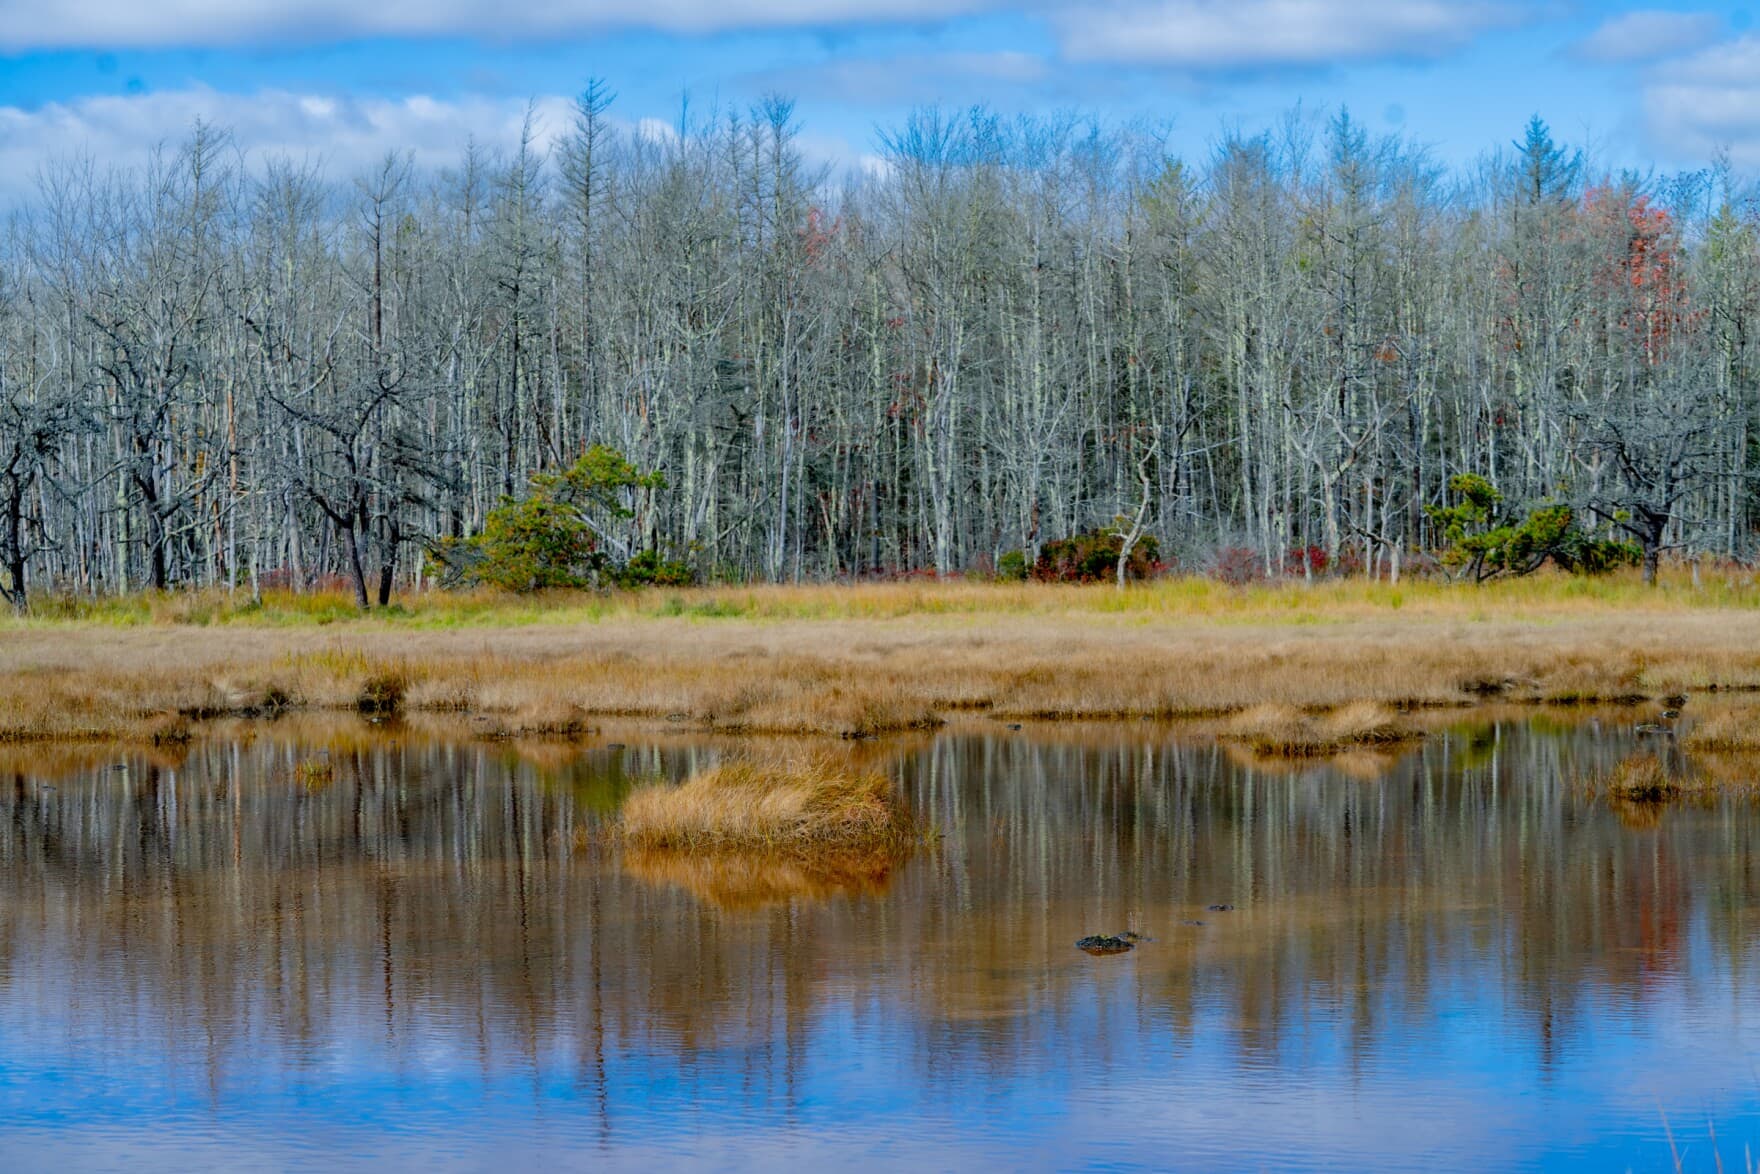 A 'ghost forest' where trees have died because of more storms and higher water levels. These ghost forests ring every marsh at the Rachel Carson Wildlife Refuge in Wells, Maine. (Rebecca Conley/Maine Public)